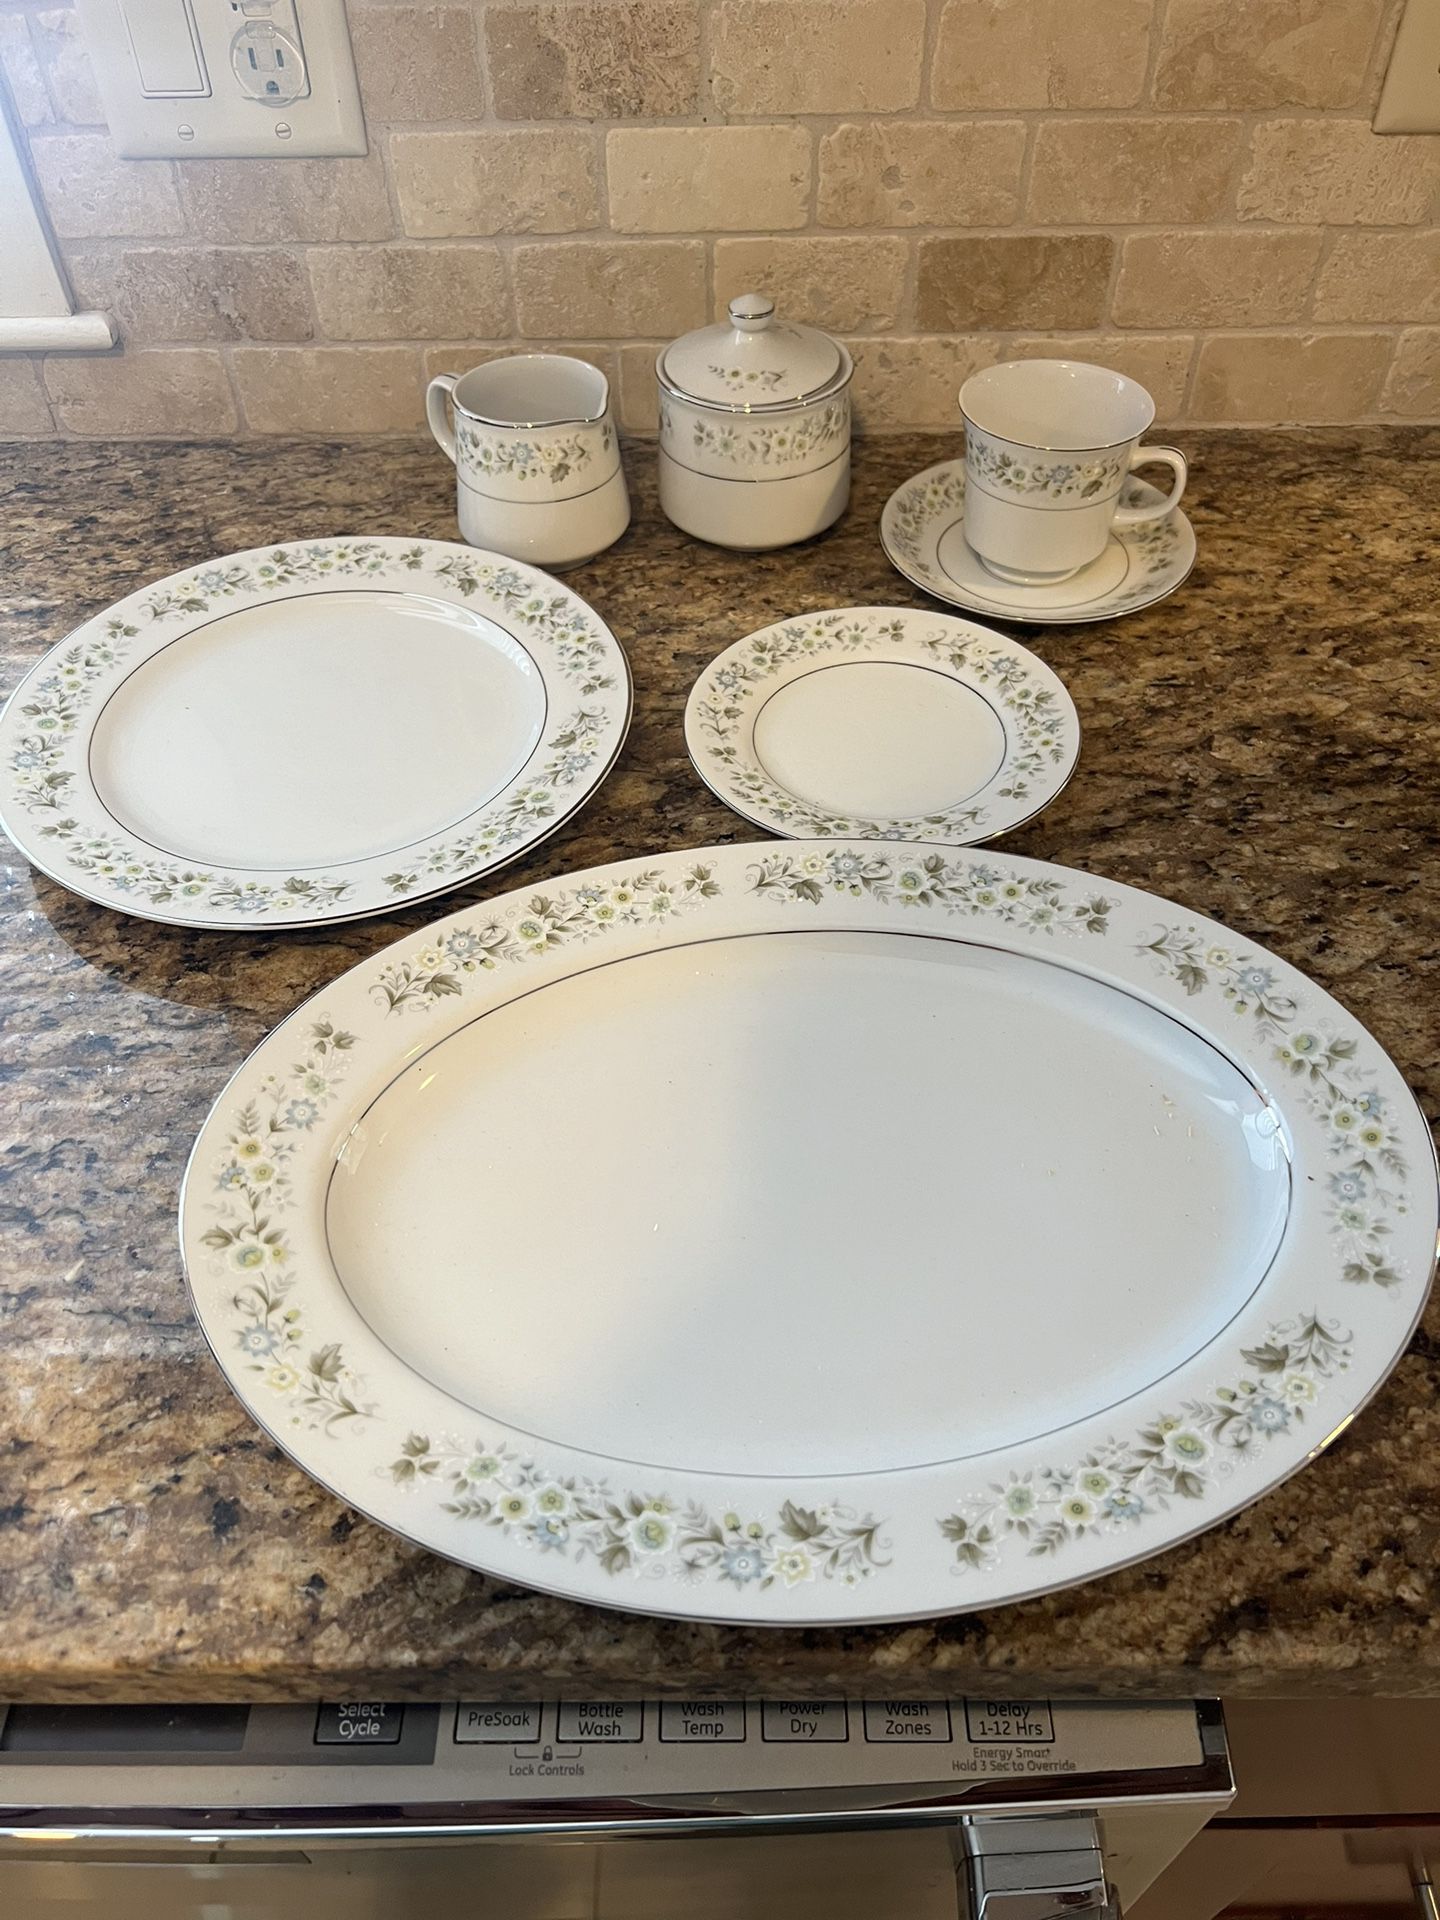 Imperial China From W Dalton Made In Japan